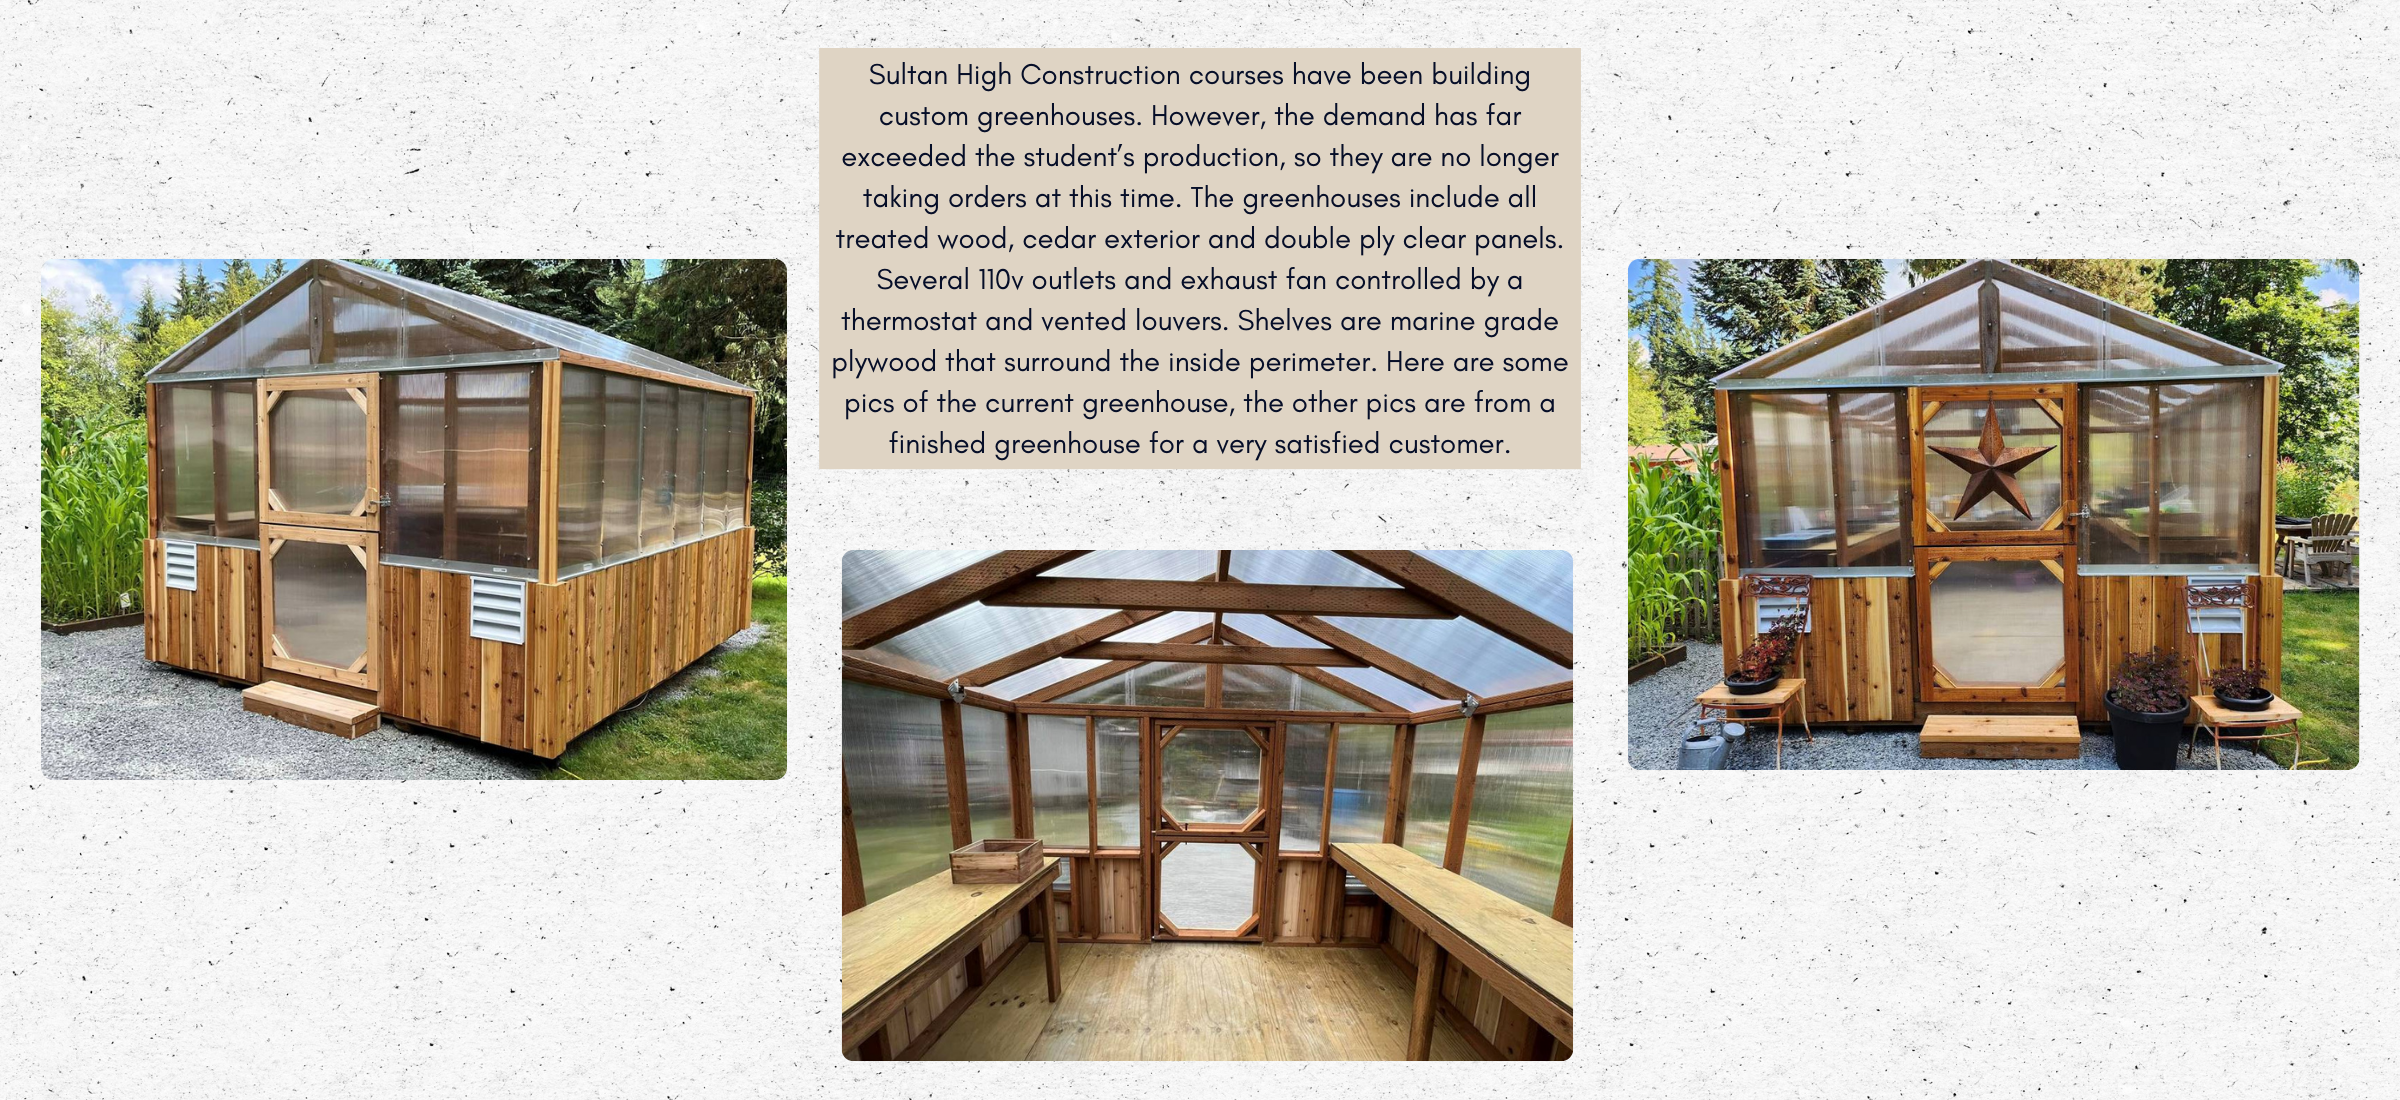 Construction Courses Greenhouse